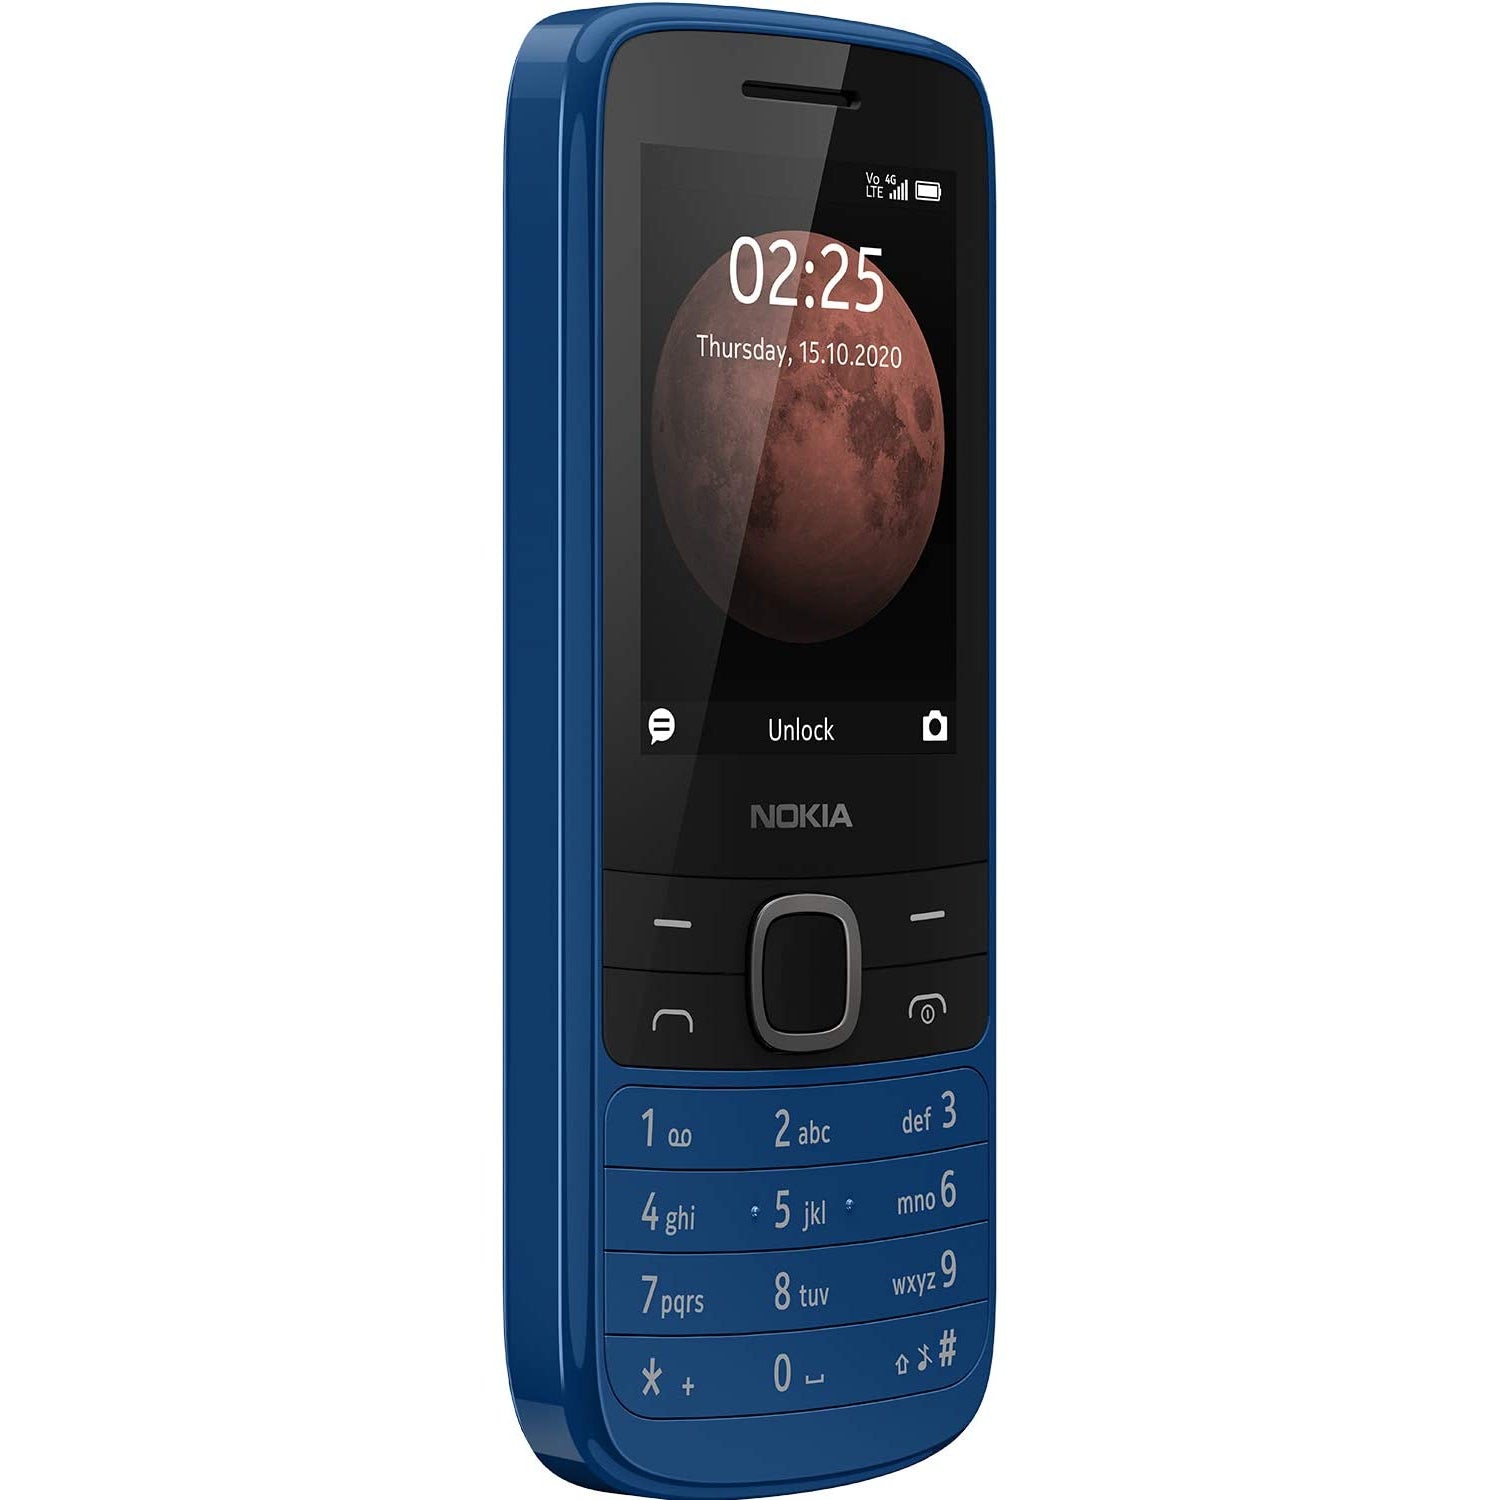 Nokia 225 4G 2.4-Inch UK SIM-Free Feature Phone - Blue - Refurbished Excellent